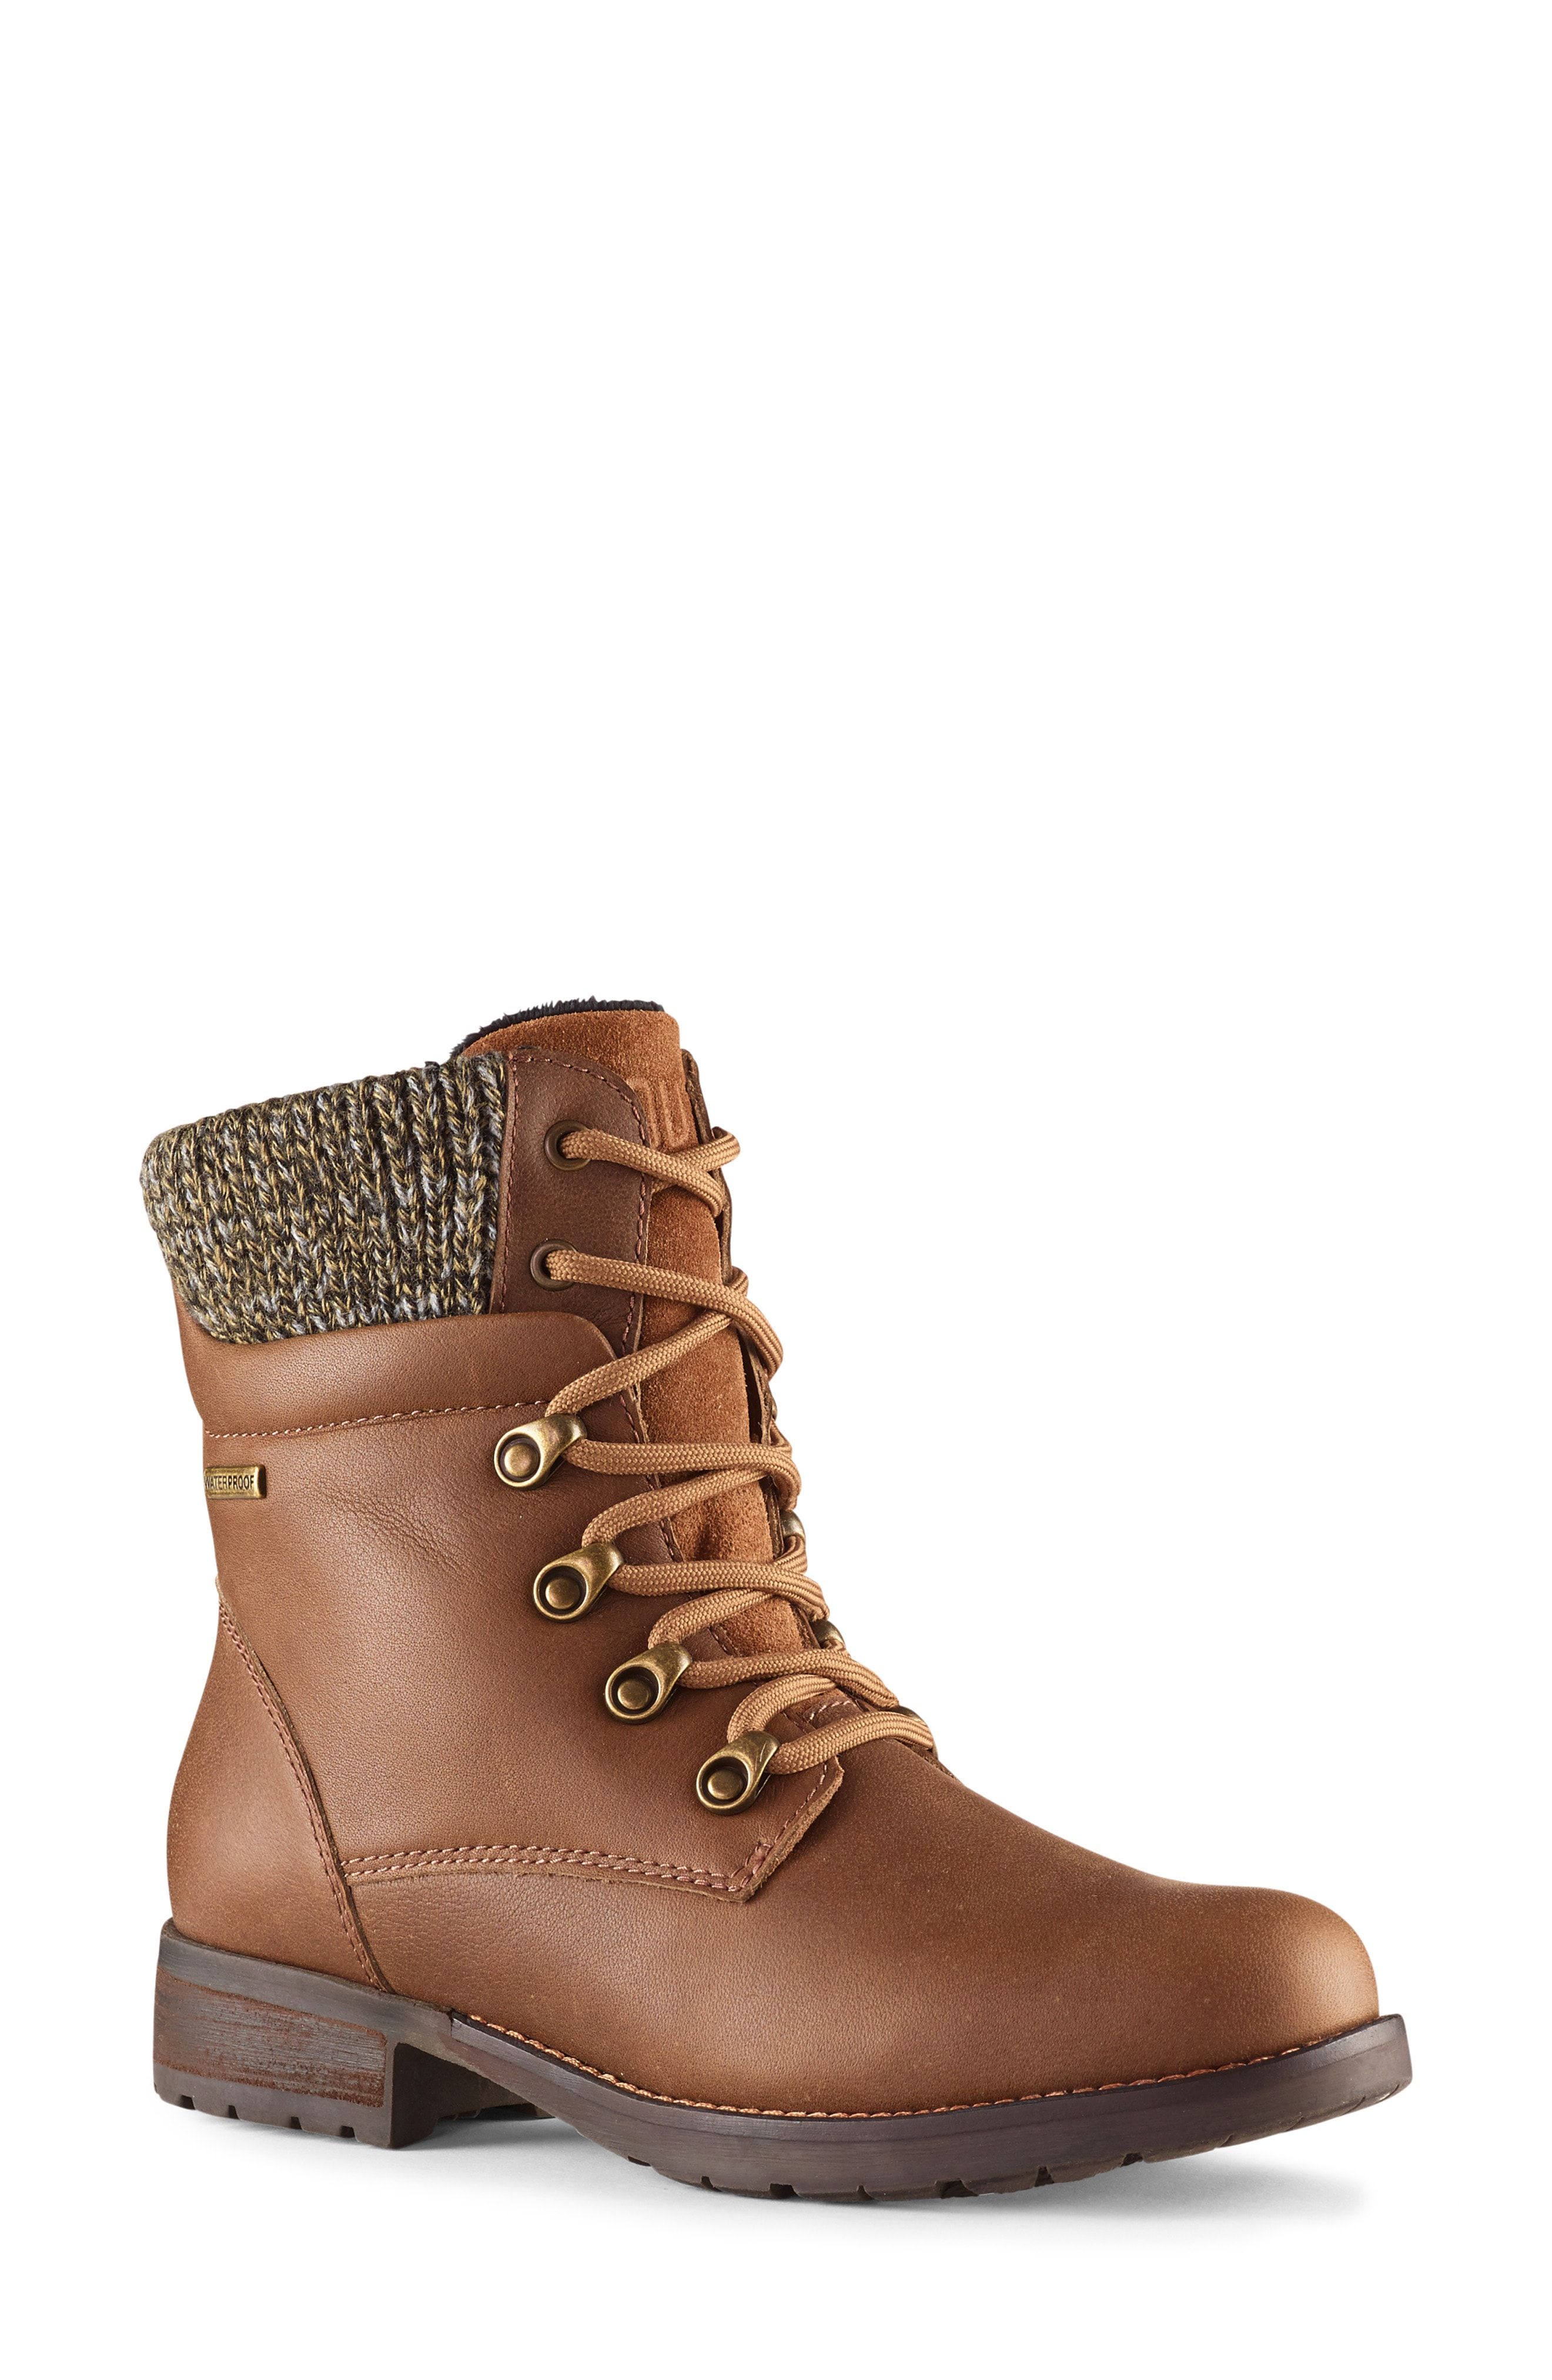 womens hiking style boots